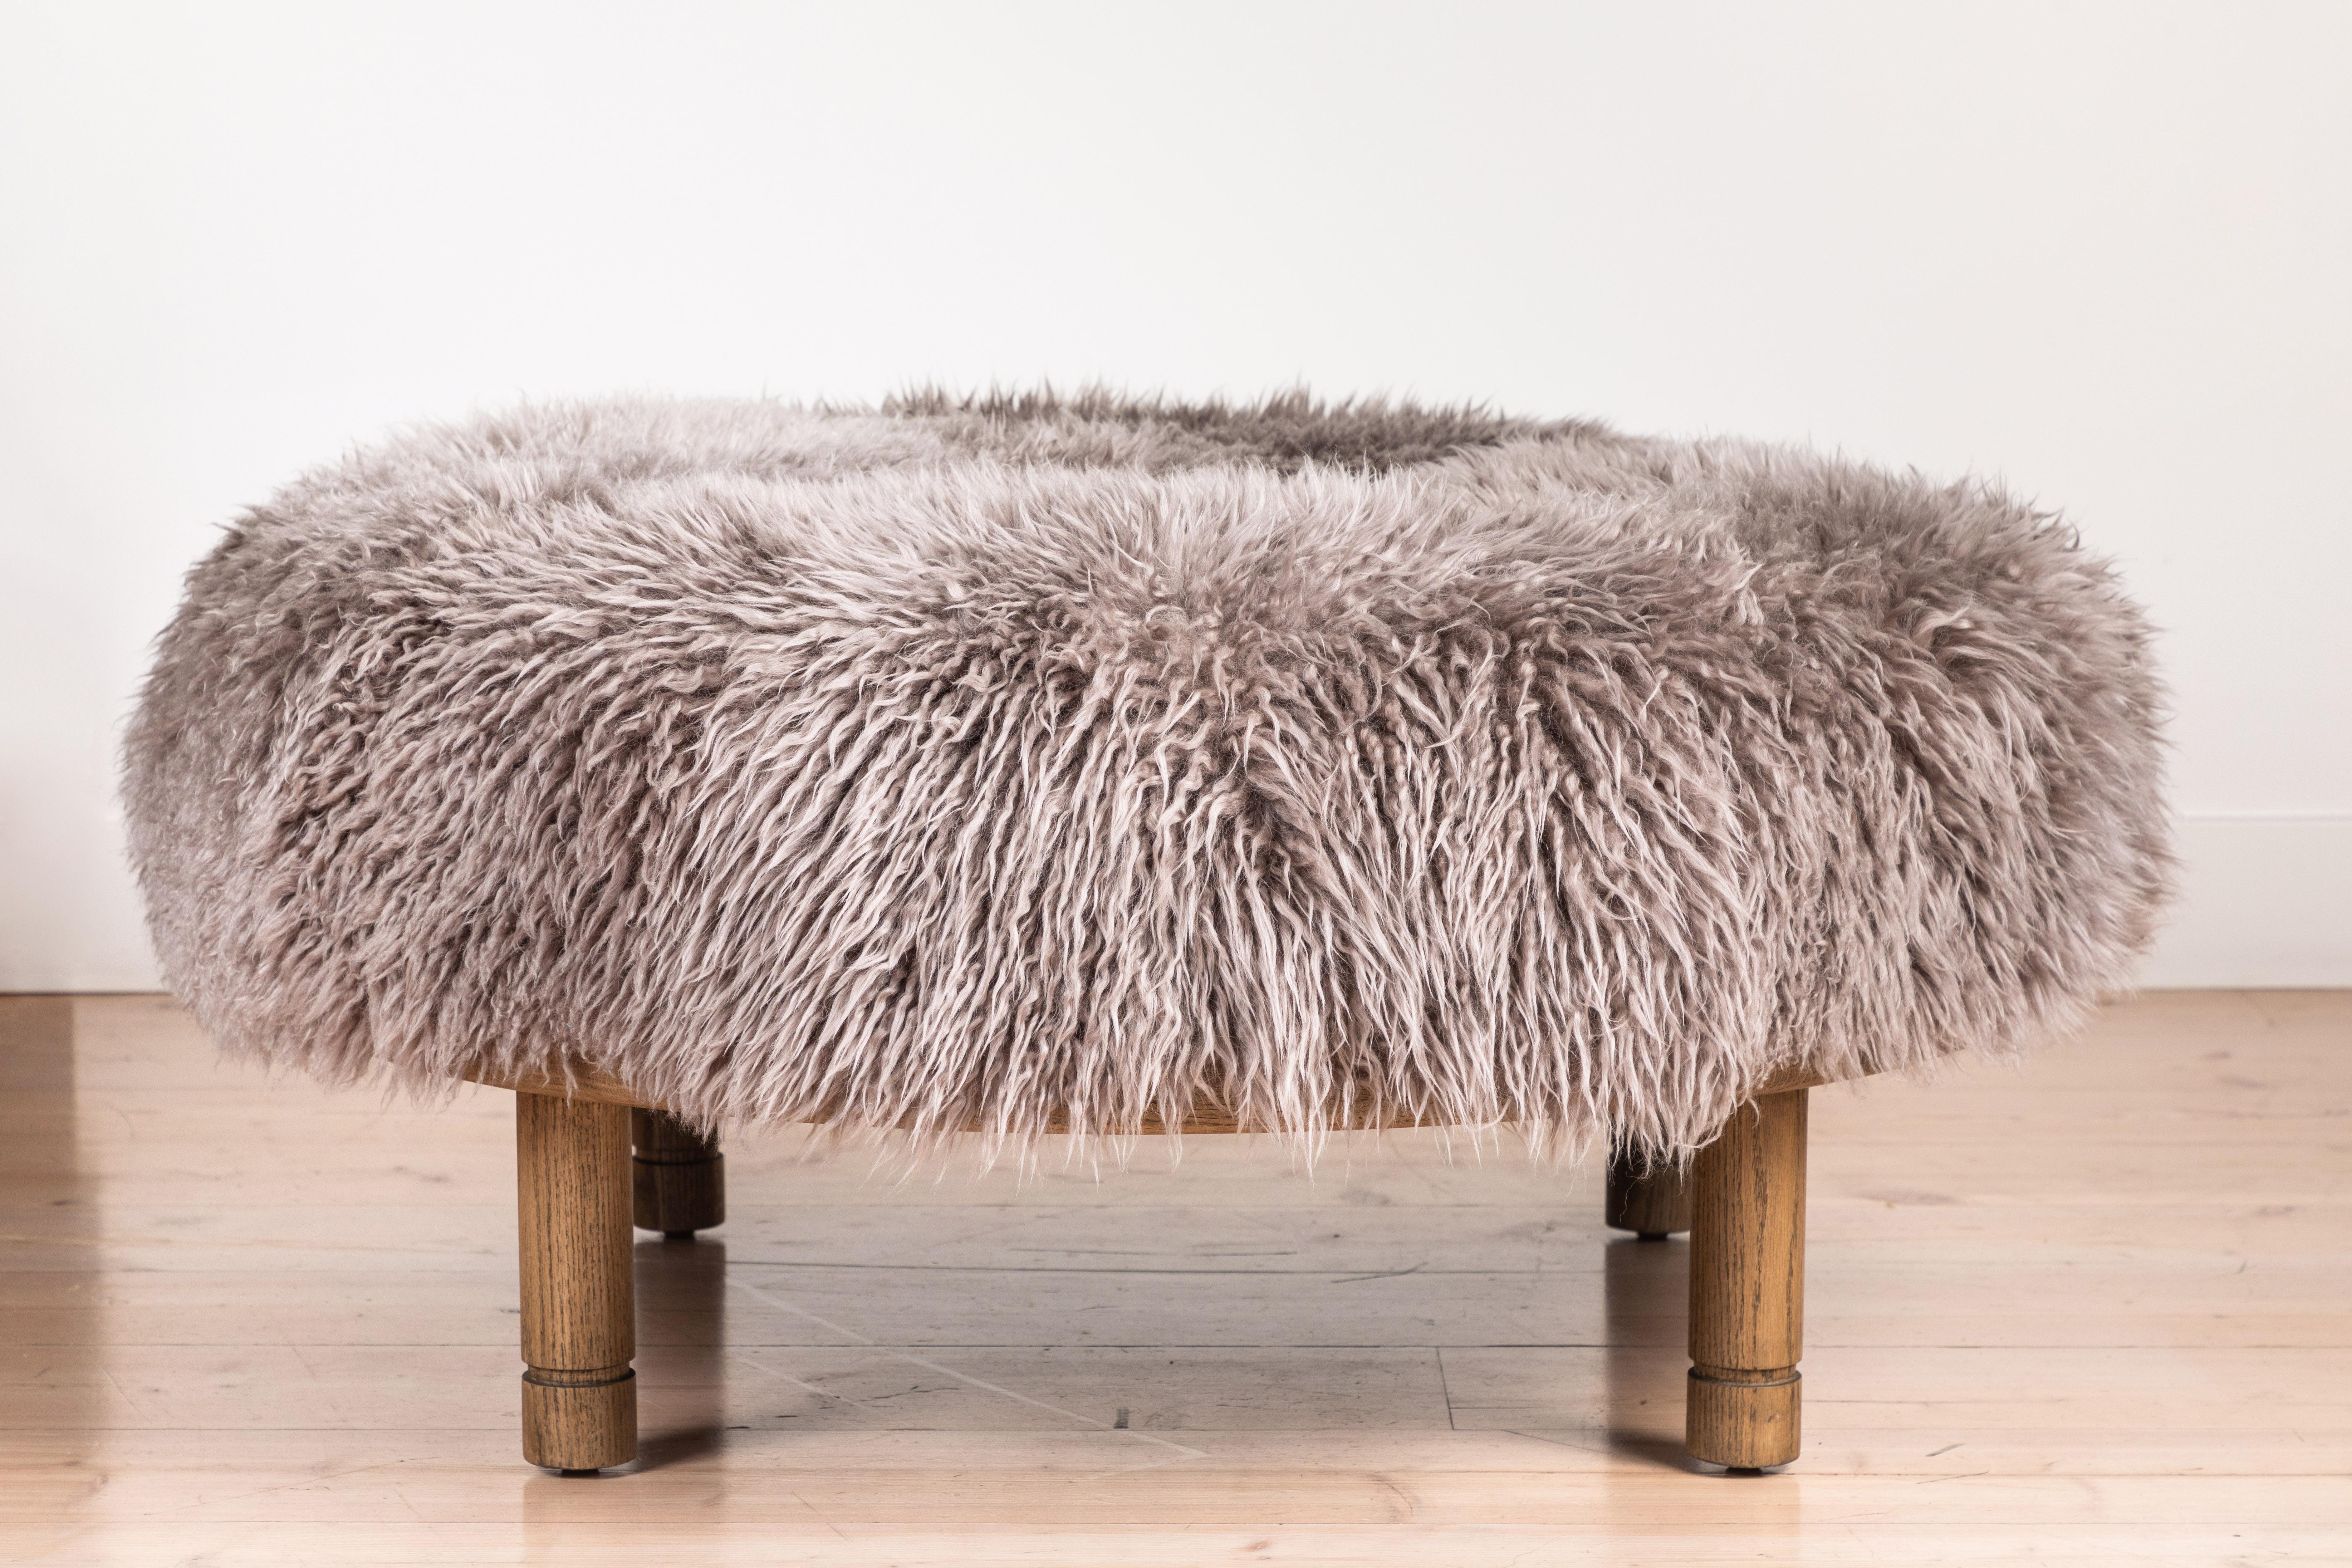 The Moreno Ottoman features a round solid wood base with four cylindrical legs and an upholstered top. Available in American walnut or white oak. Shown here in Smoked Oak and Garret Shearling. 

Available to order in Customer's Own Material with a